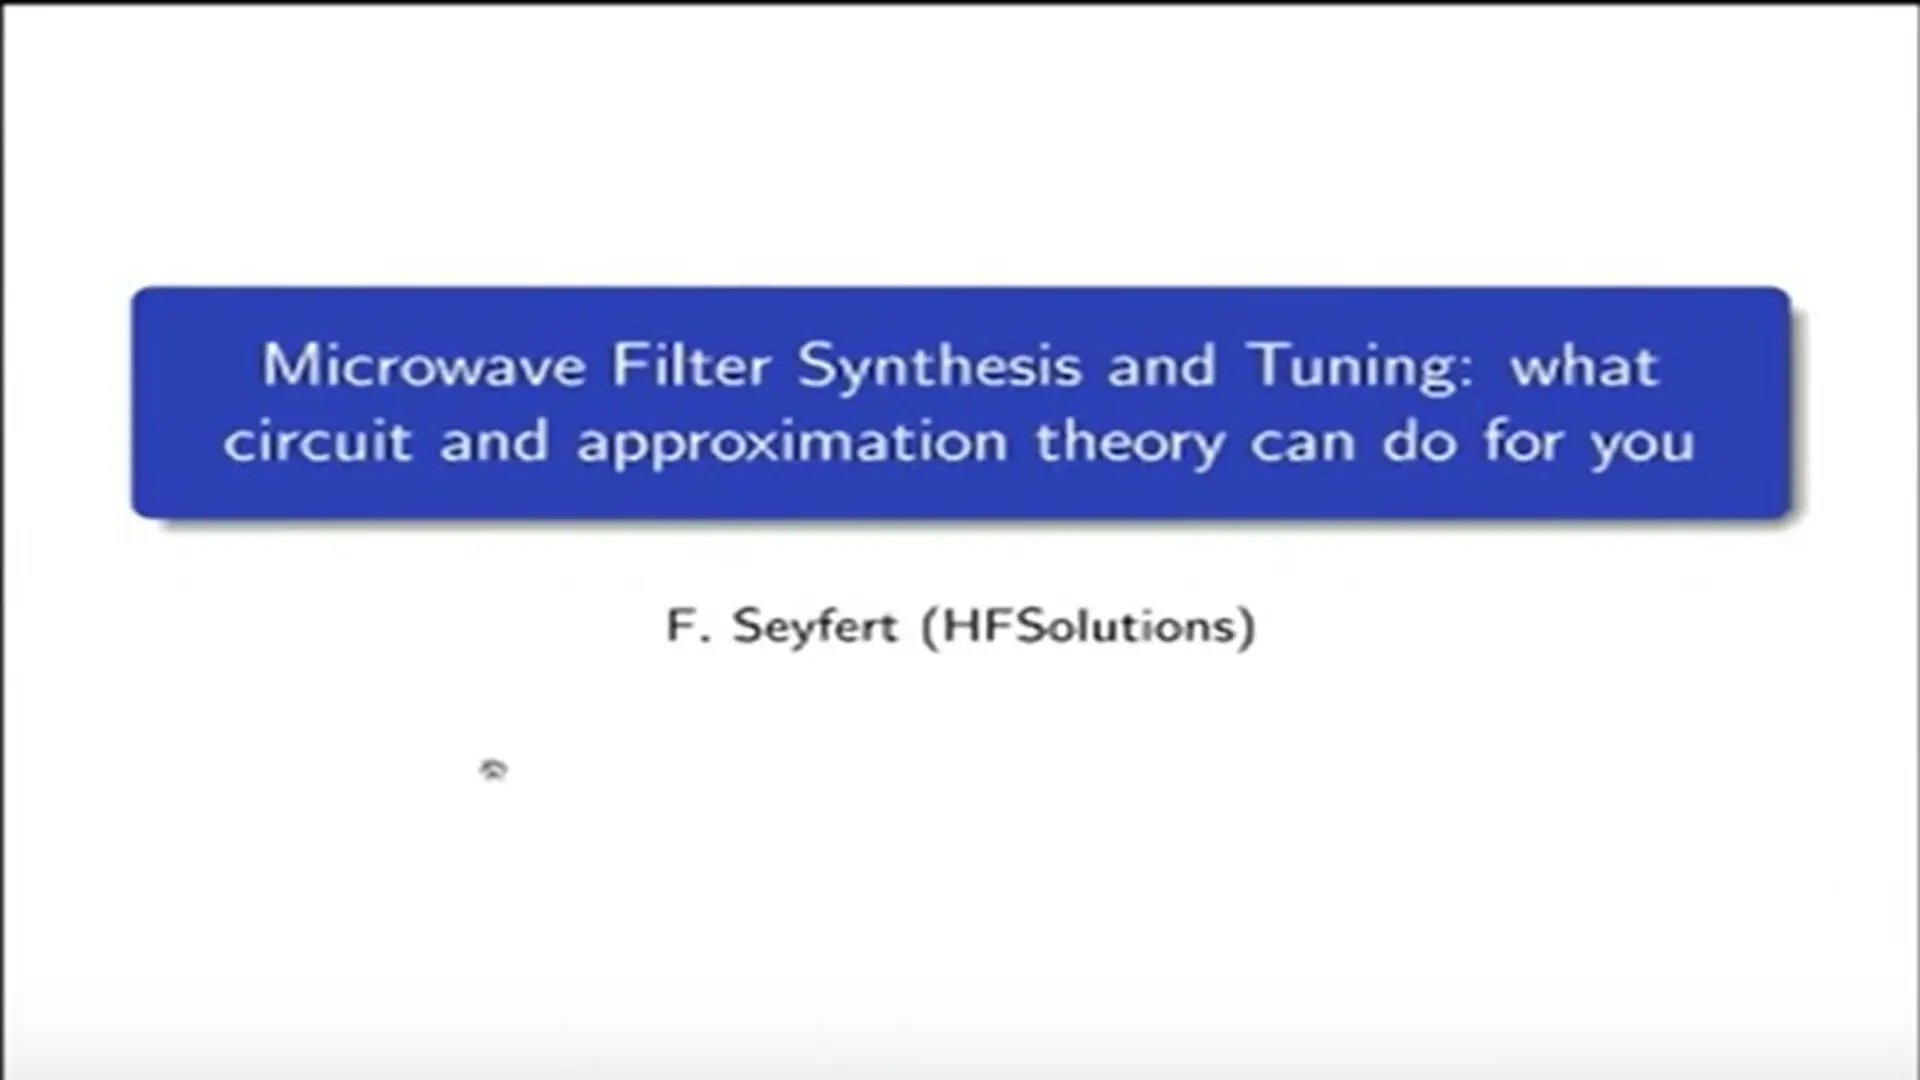 Microwave Filter Synthesis and Tuning: What Circuit and Approximation Theory Can Do For You  